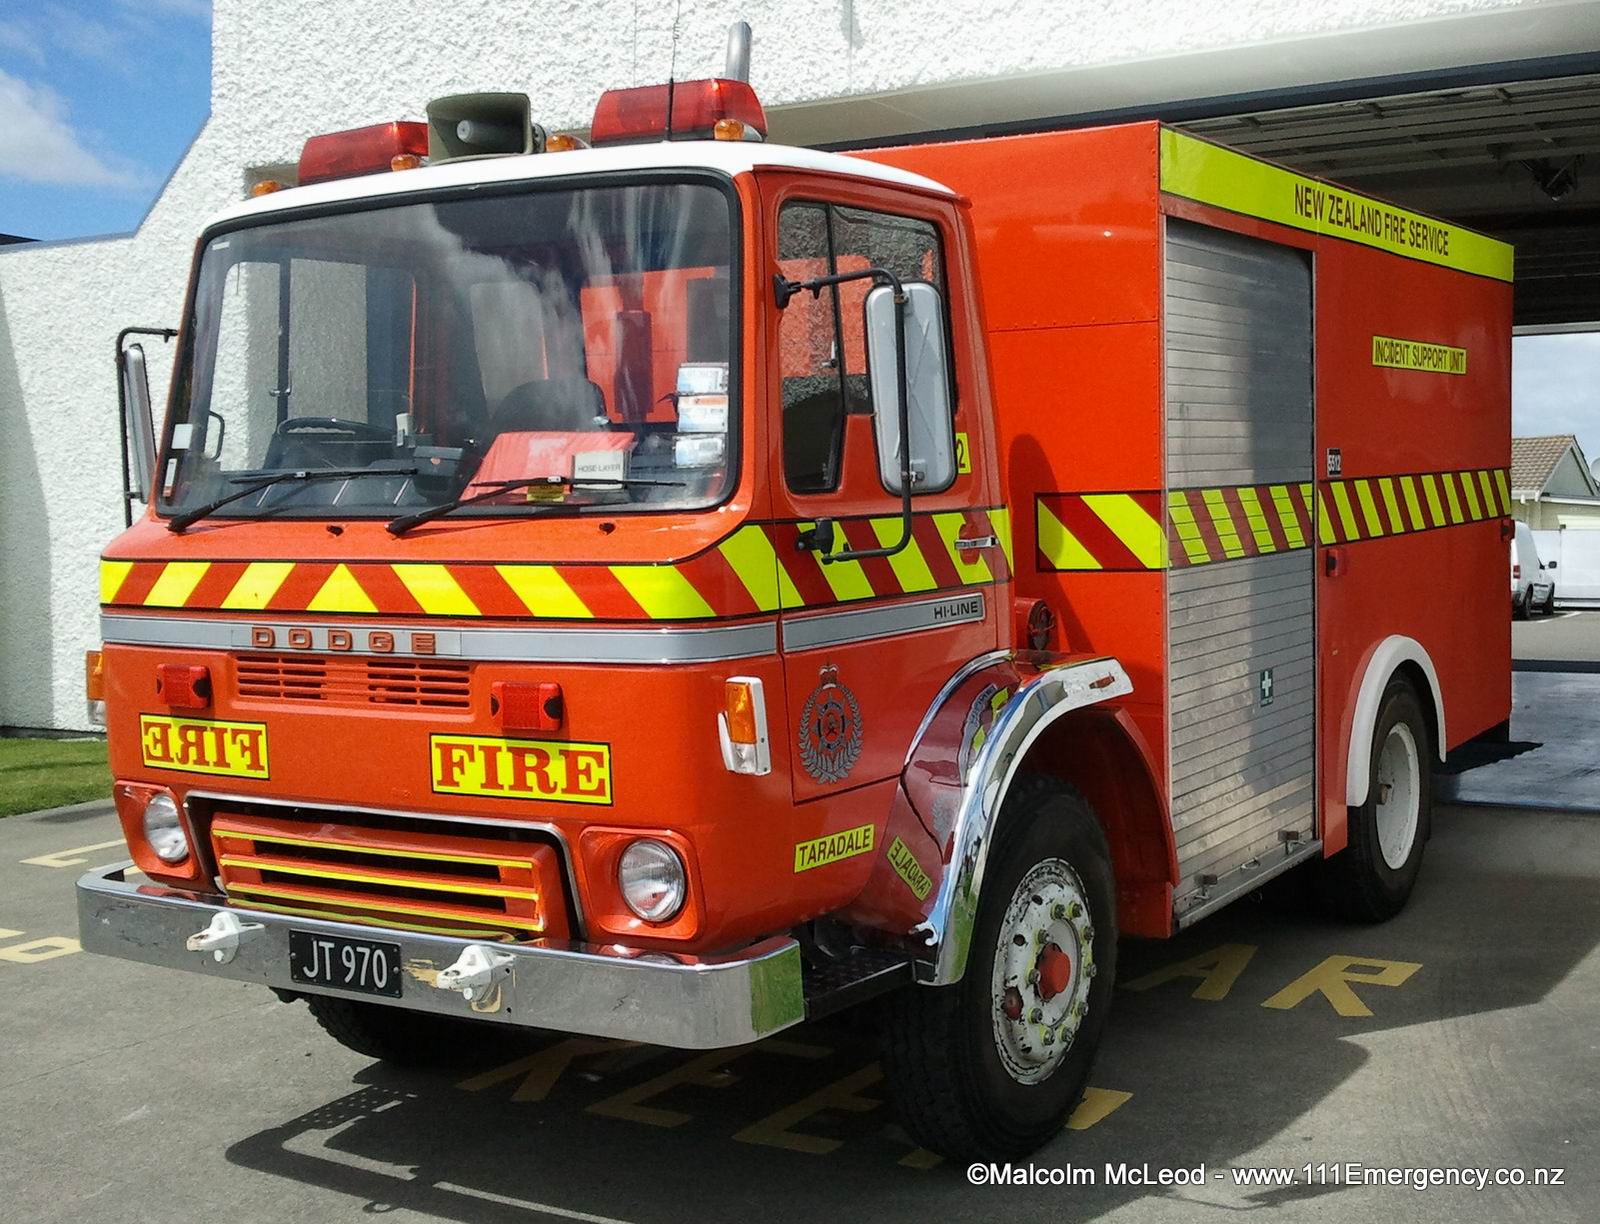 1980 Dodge RG15. JT 970. Photo by Malcolm McLeod. More pics of Taradale 5512